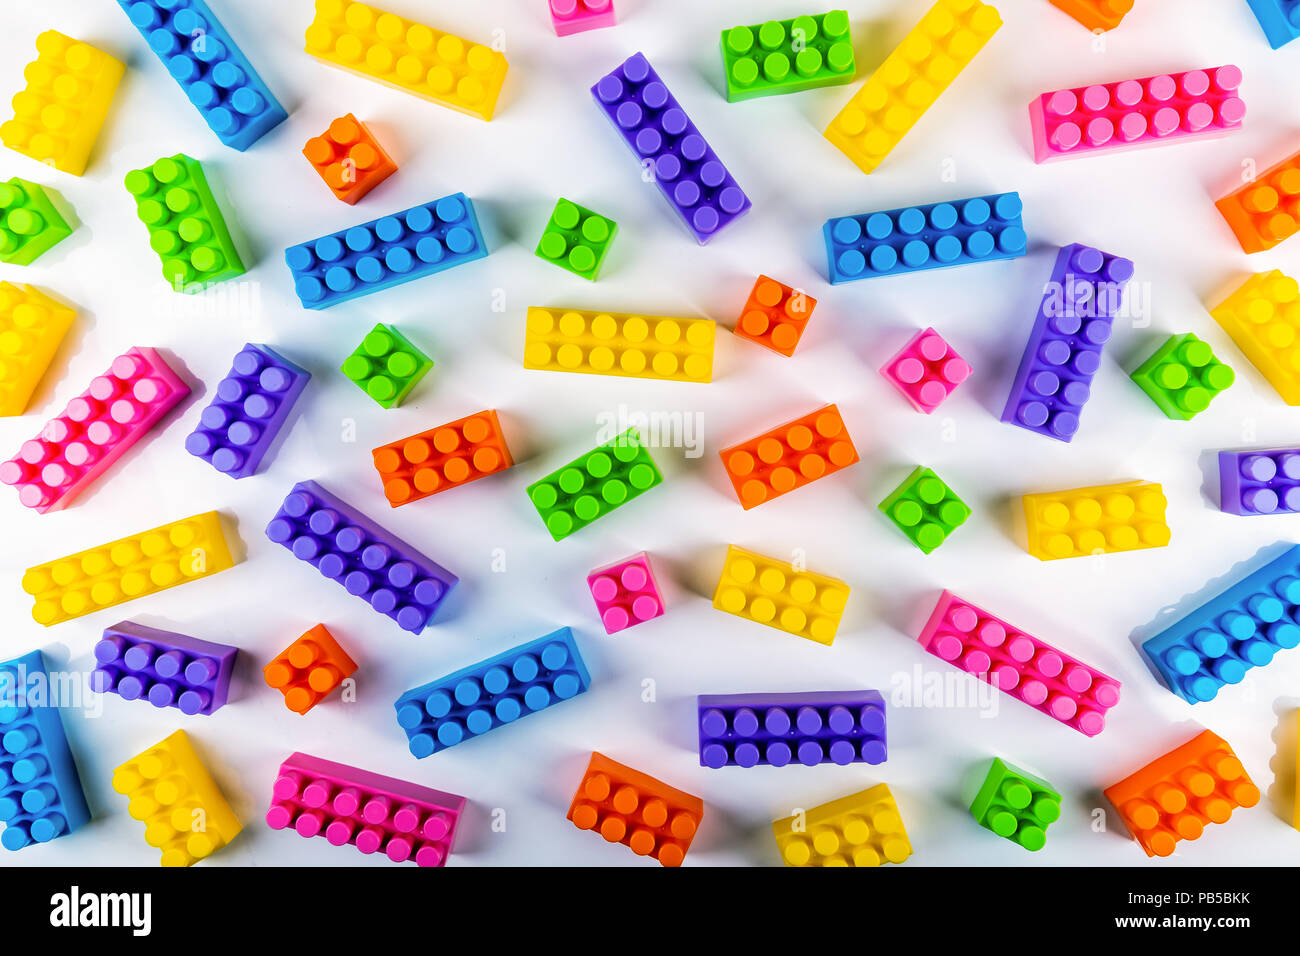 colorful toy plastic building blocks. top view Stock Photo